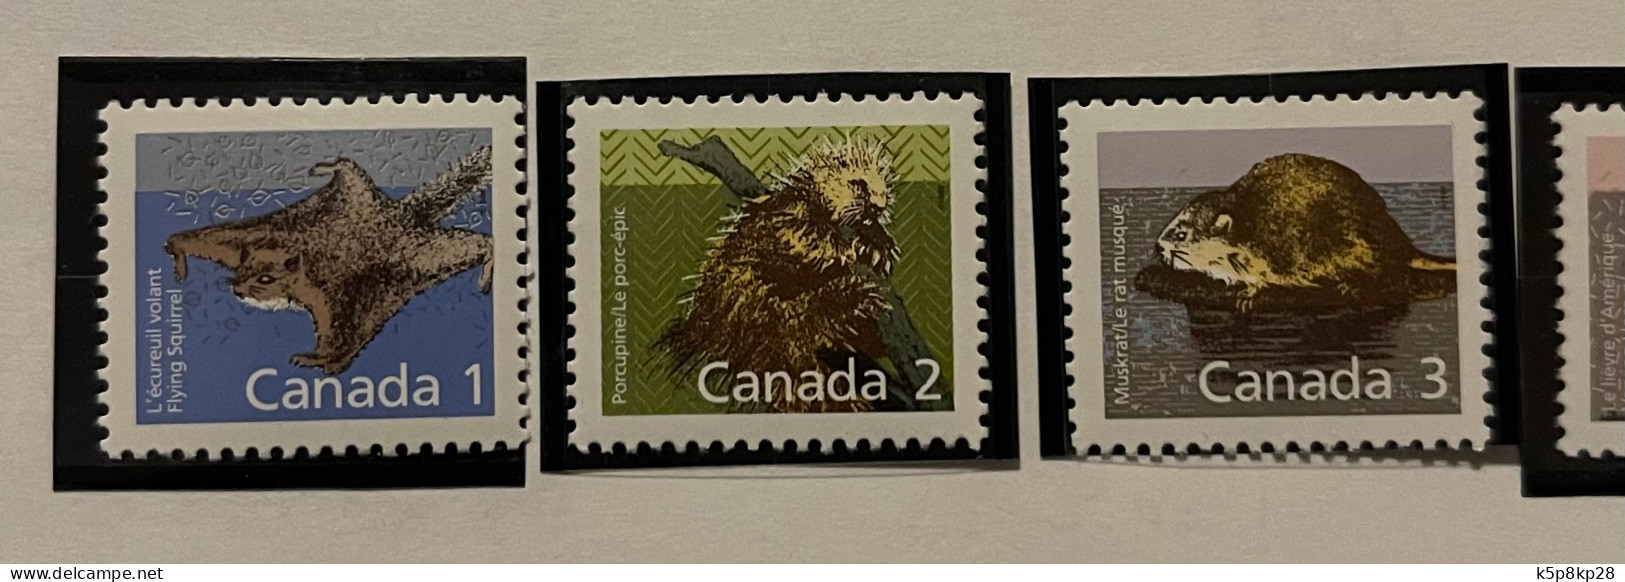 1987 Canada Stamps, Wild Definitives, 6 Value, MNH, VF - Unused Stamps